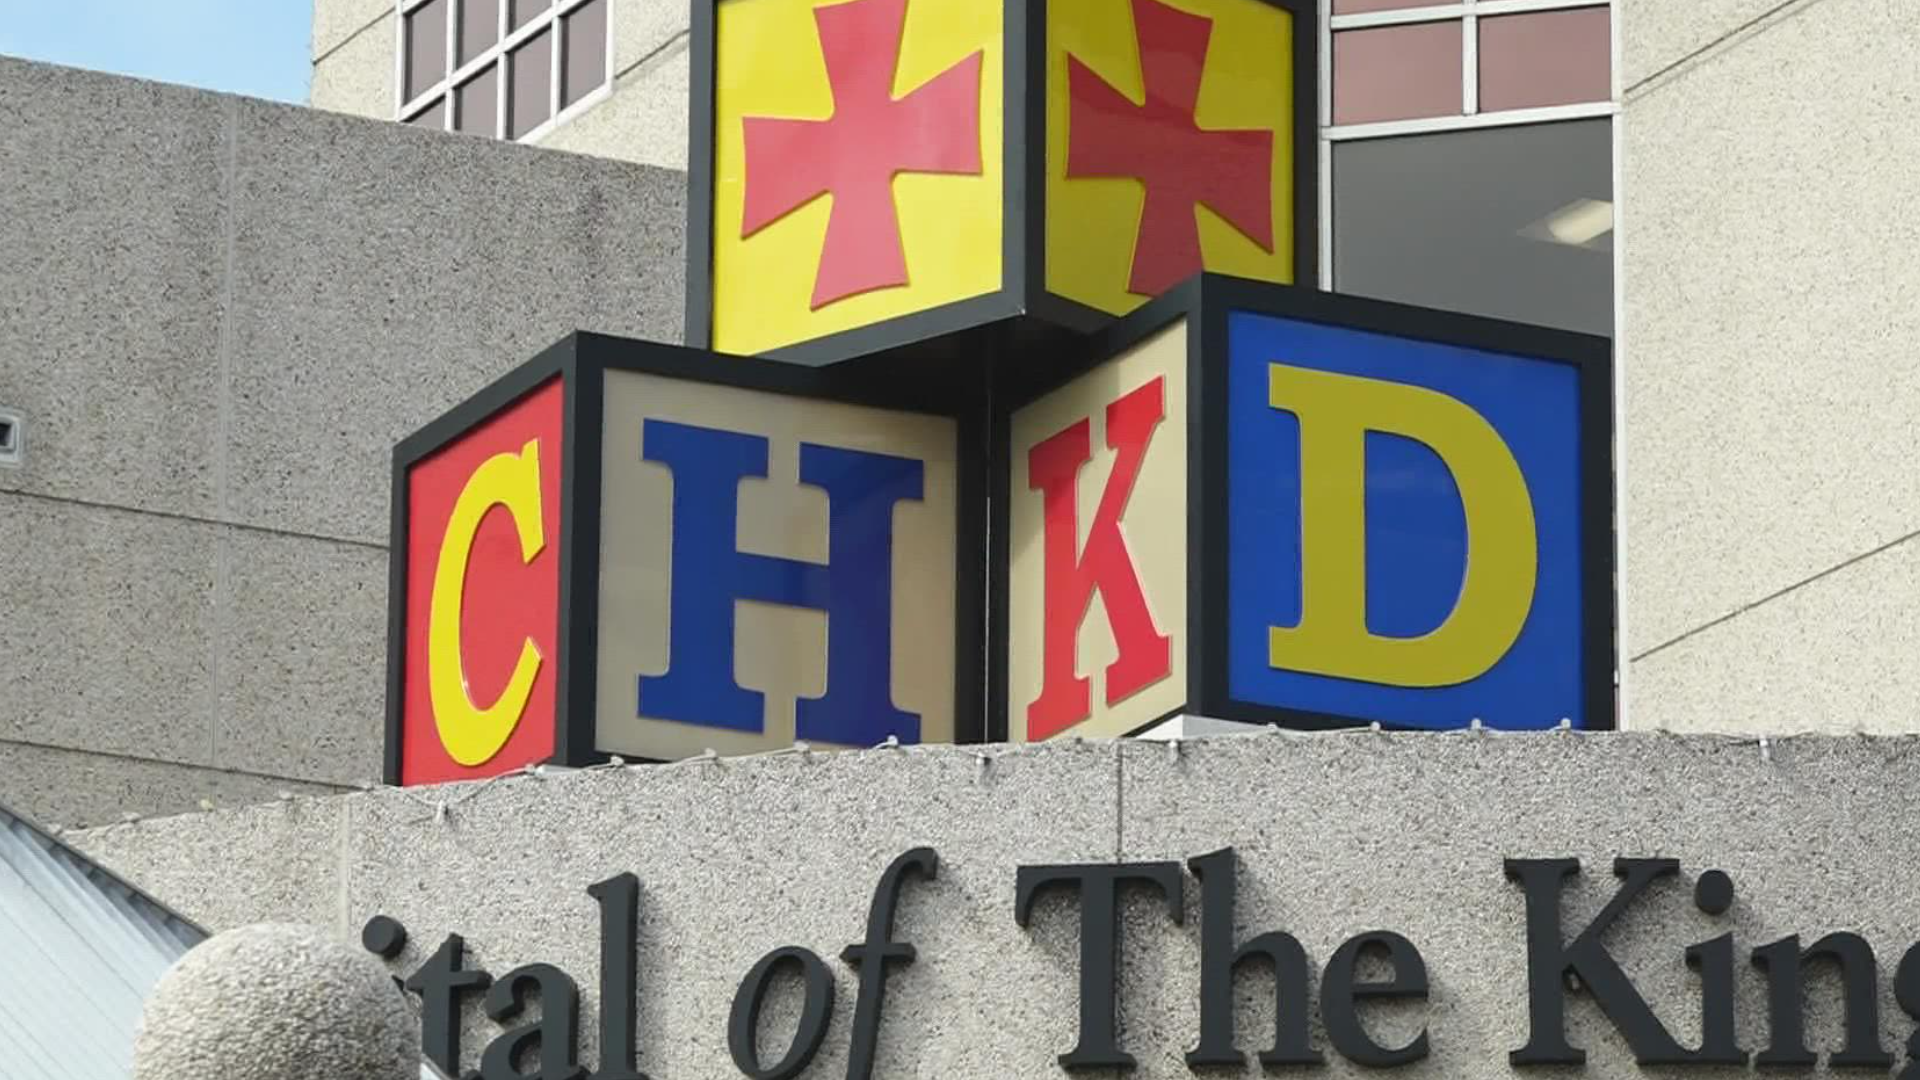 More children are going to the hospital with COVID-19 in Hampton Roads. CHKD says September has been the busiest month since the pandemic started.